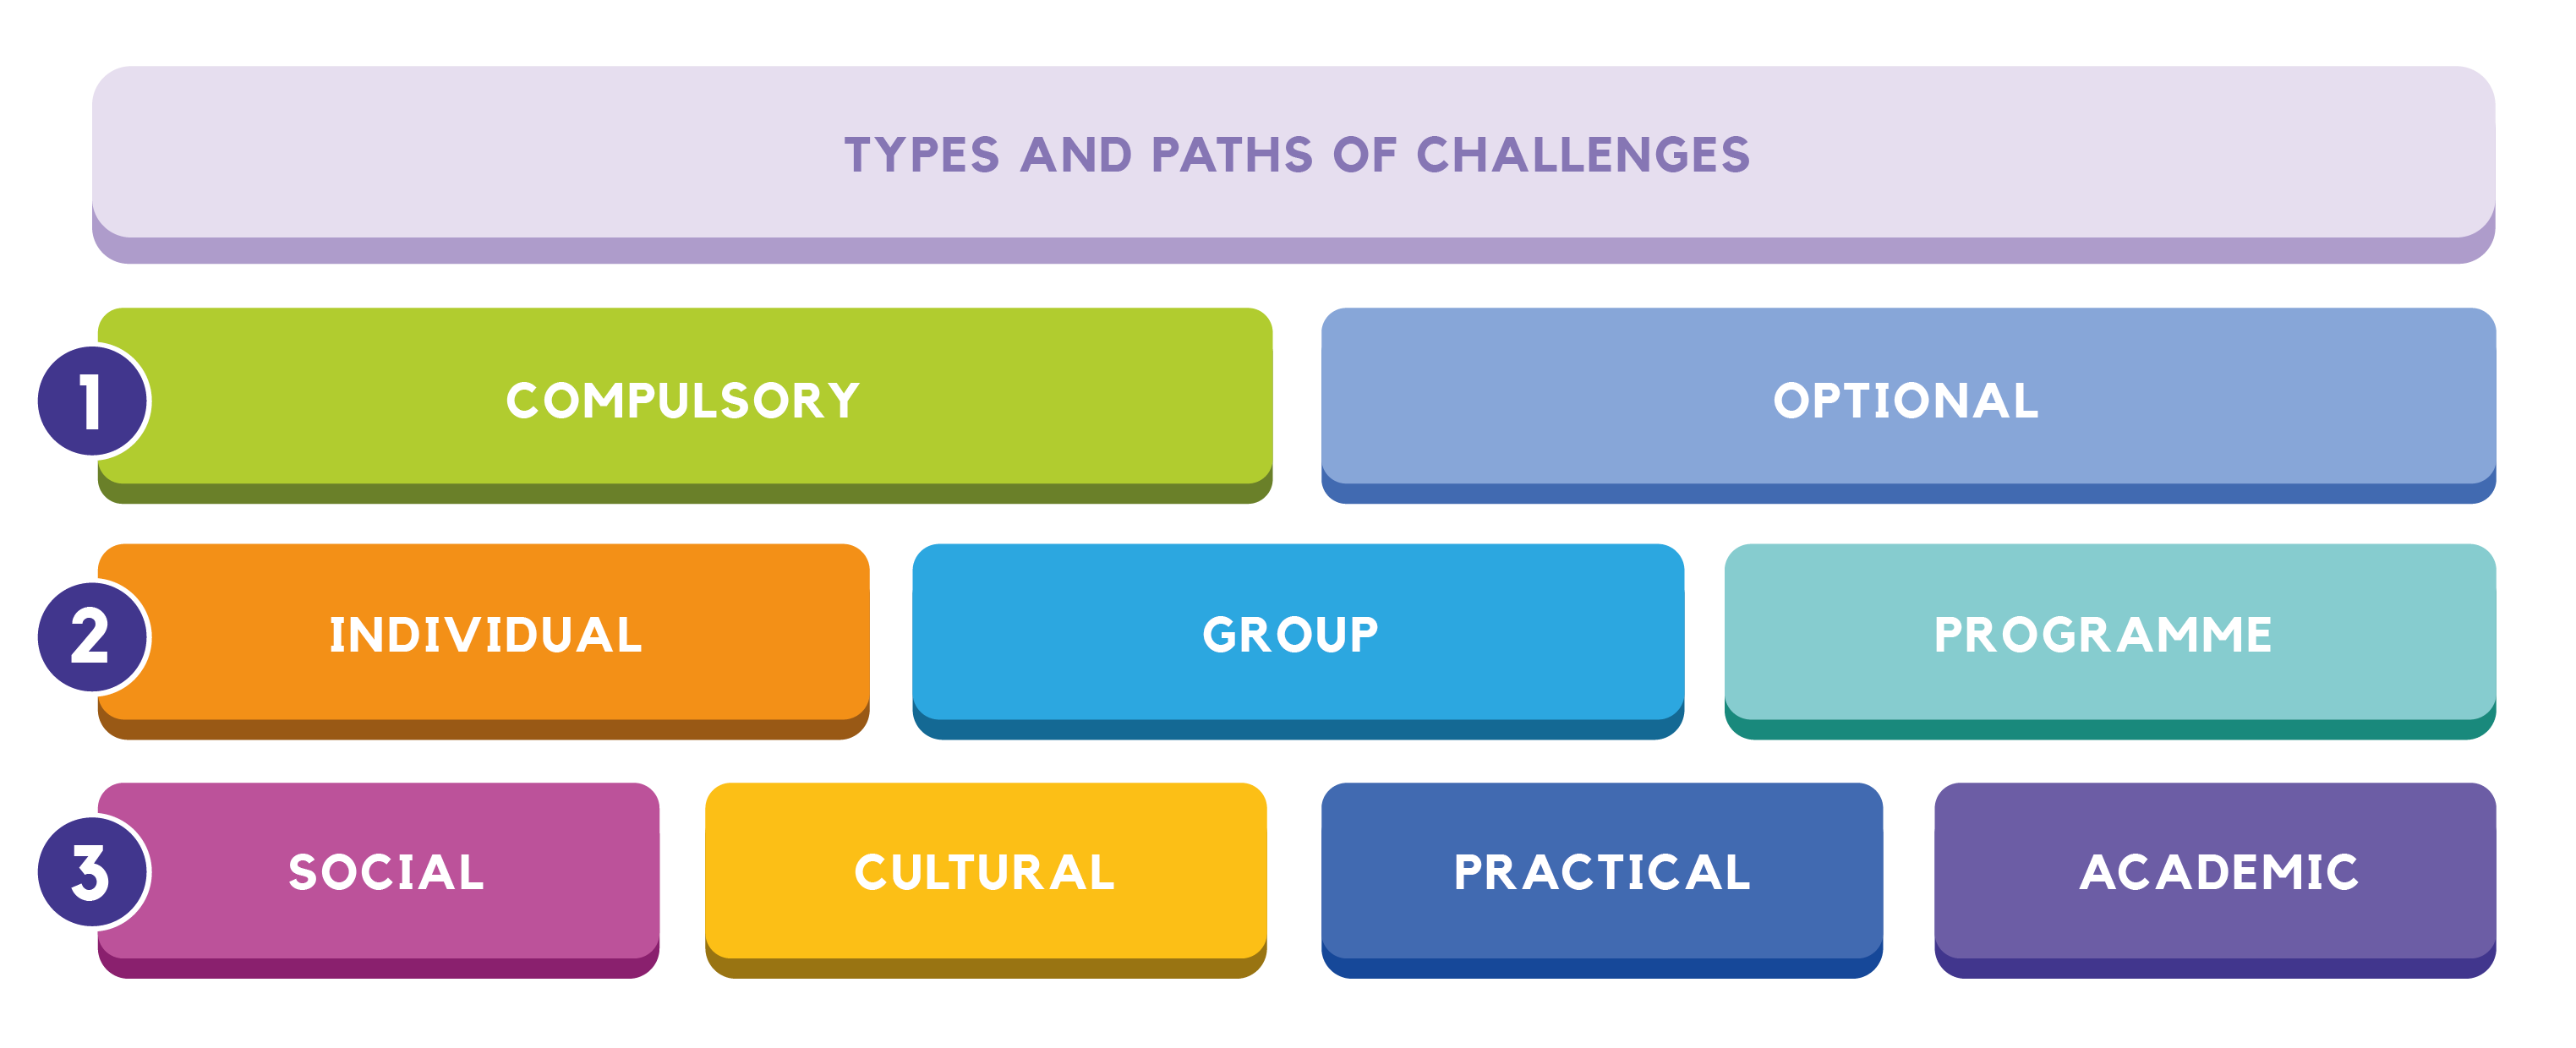 2.FIG_Types and paths of challenges